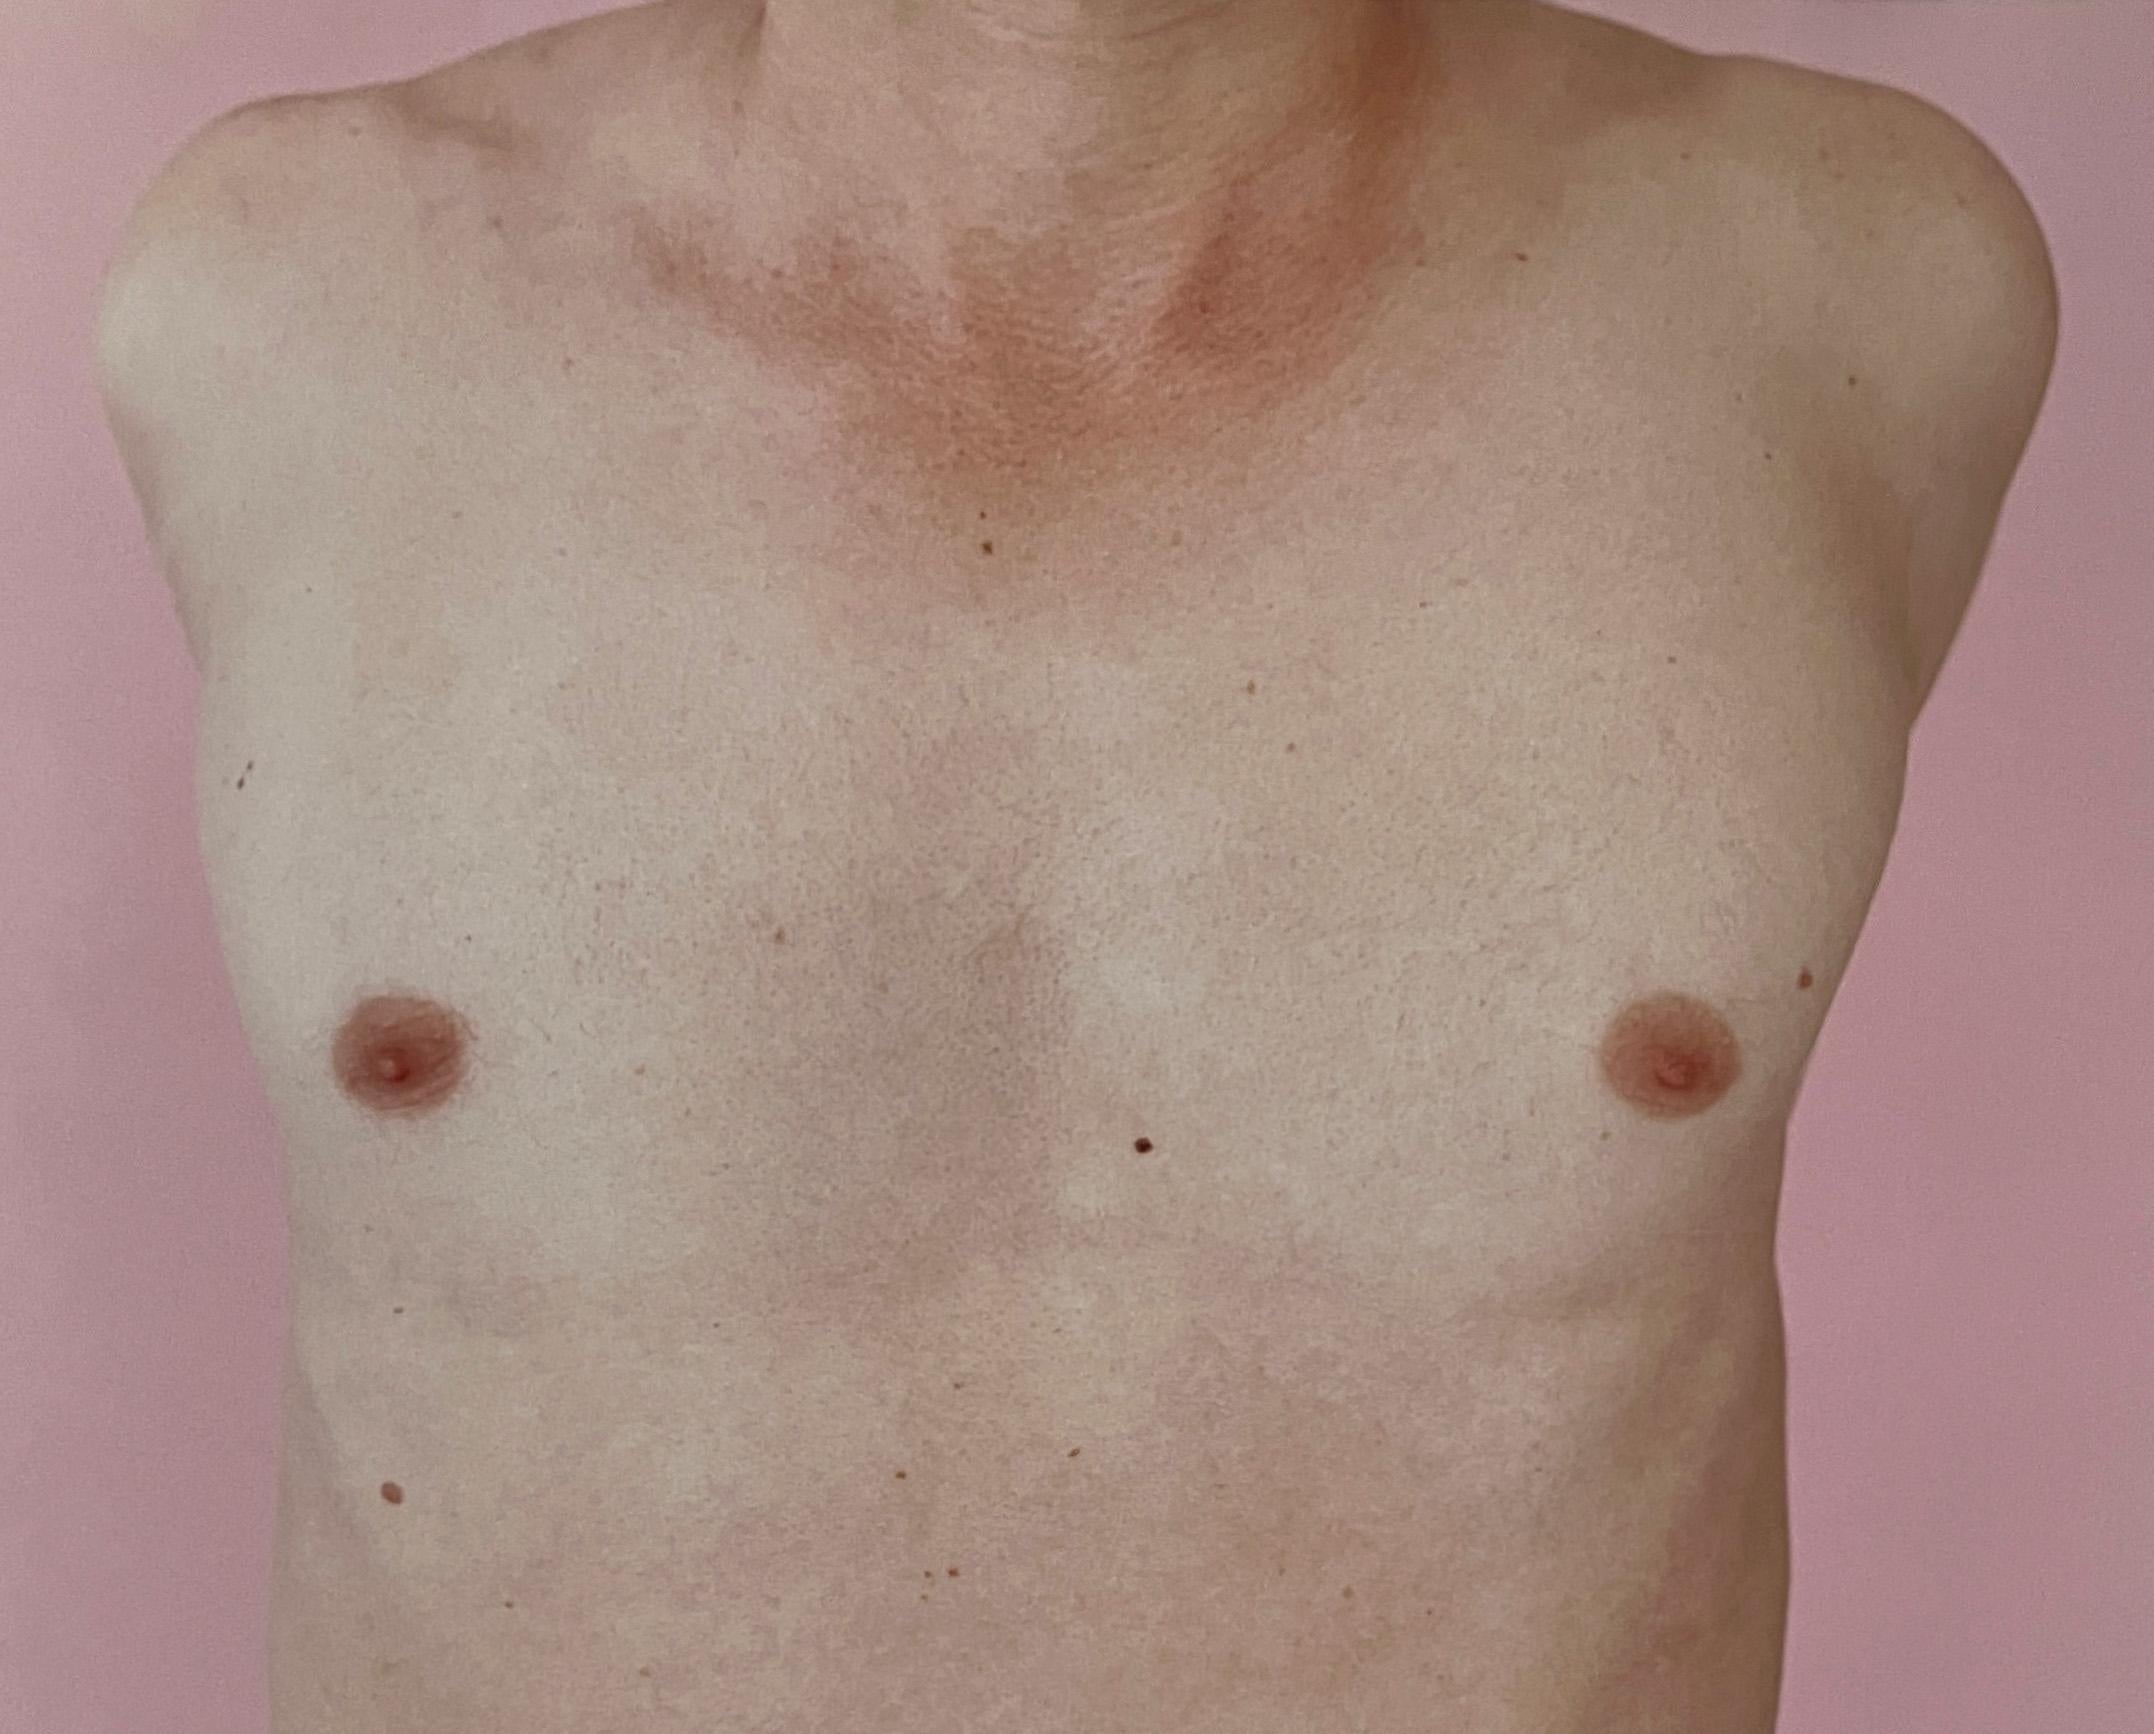 Kouros Torso Pink, by Michael James O’Brien
Color fiber paper
Paper size: 24 H x 20 W inches.
Ed 3/5 + 2AP
Unframed 

Medium format color neg film
Photographed with Pentax 6 x 7 camera In natural light 
_________________

Michael James O’Brien is a